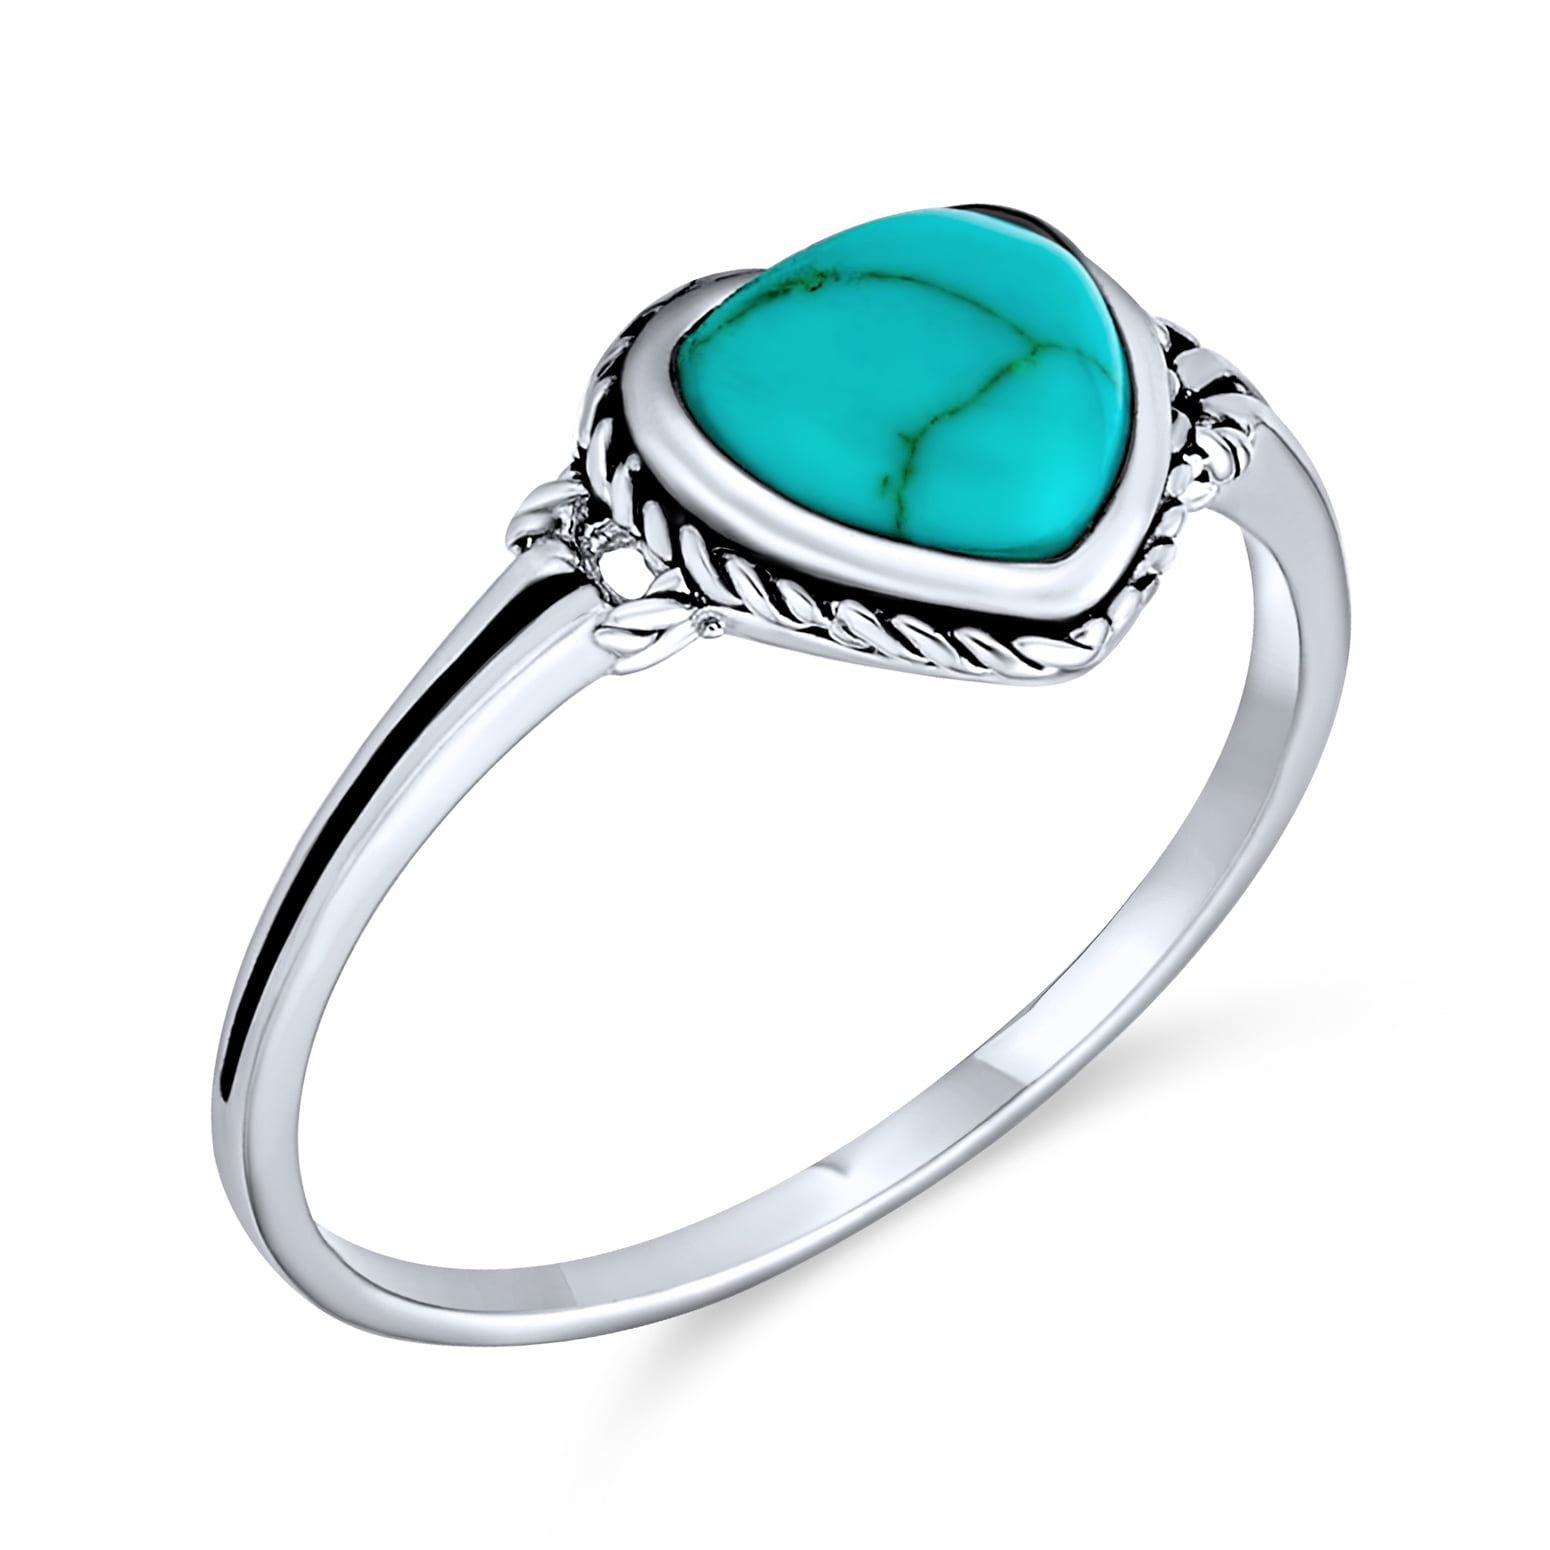 Solitaire Ring Sterling Silver Cushion Blue Turquoise for Women Ct 3.15 Gifts